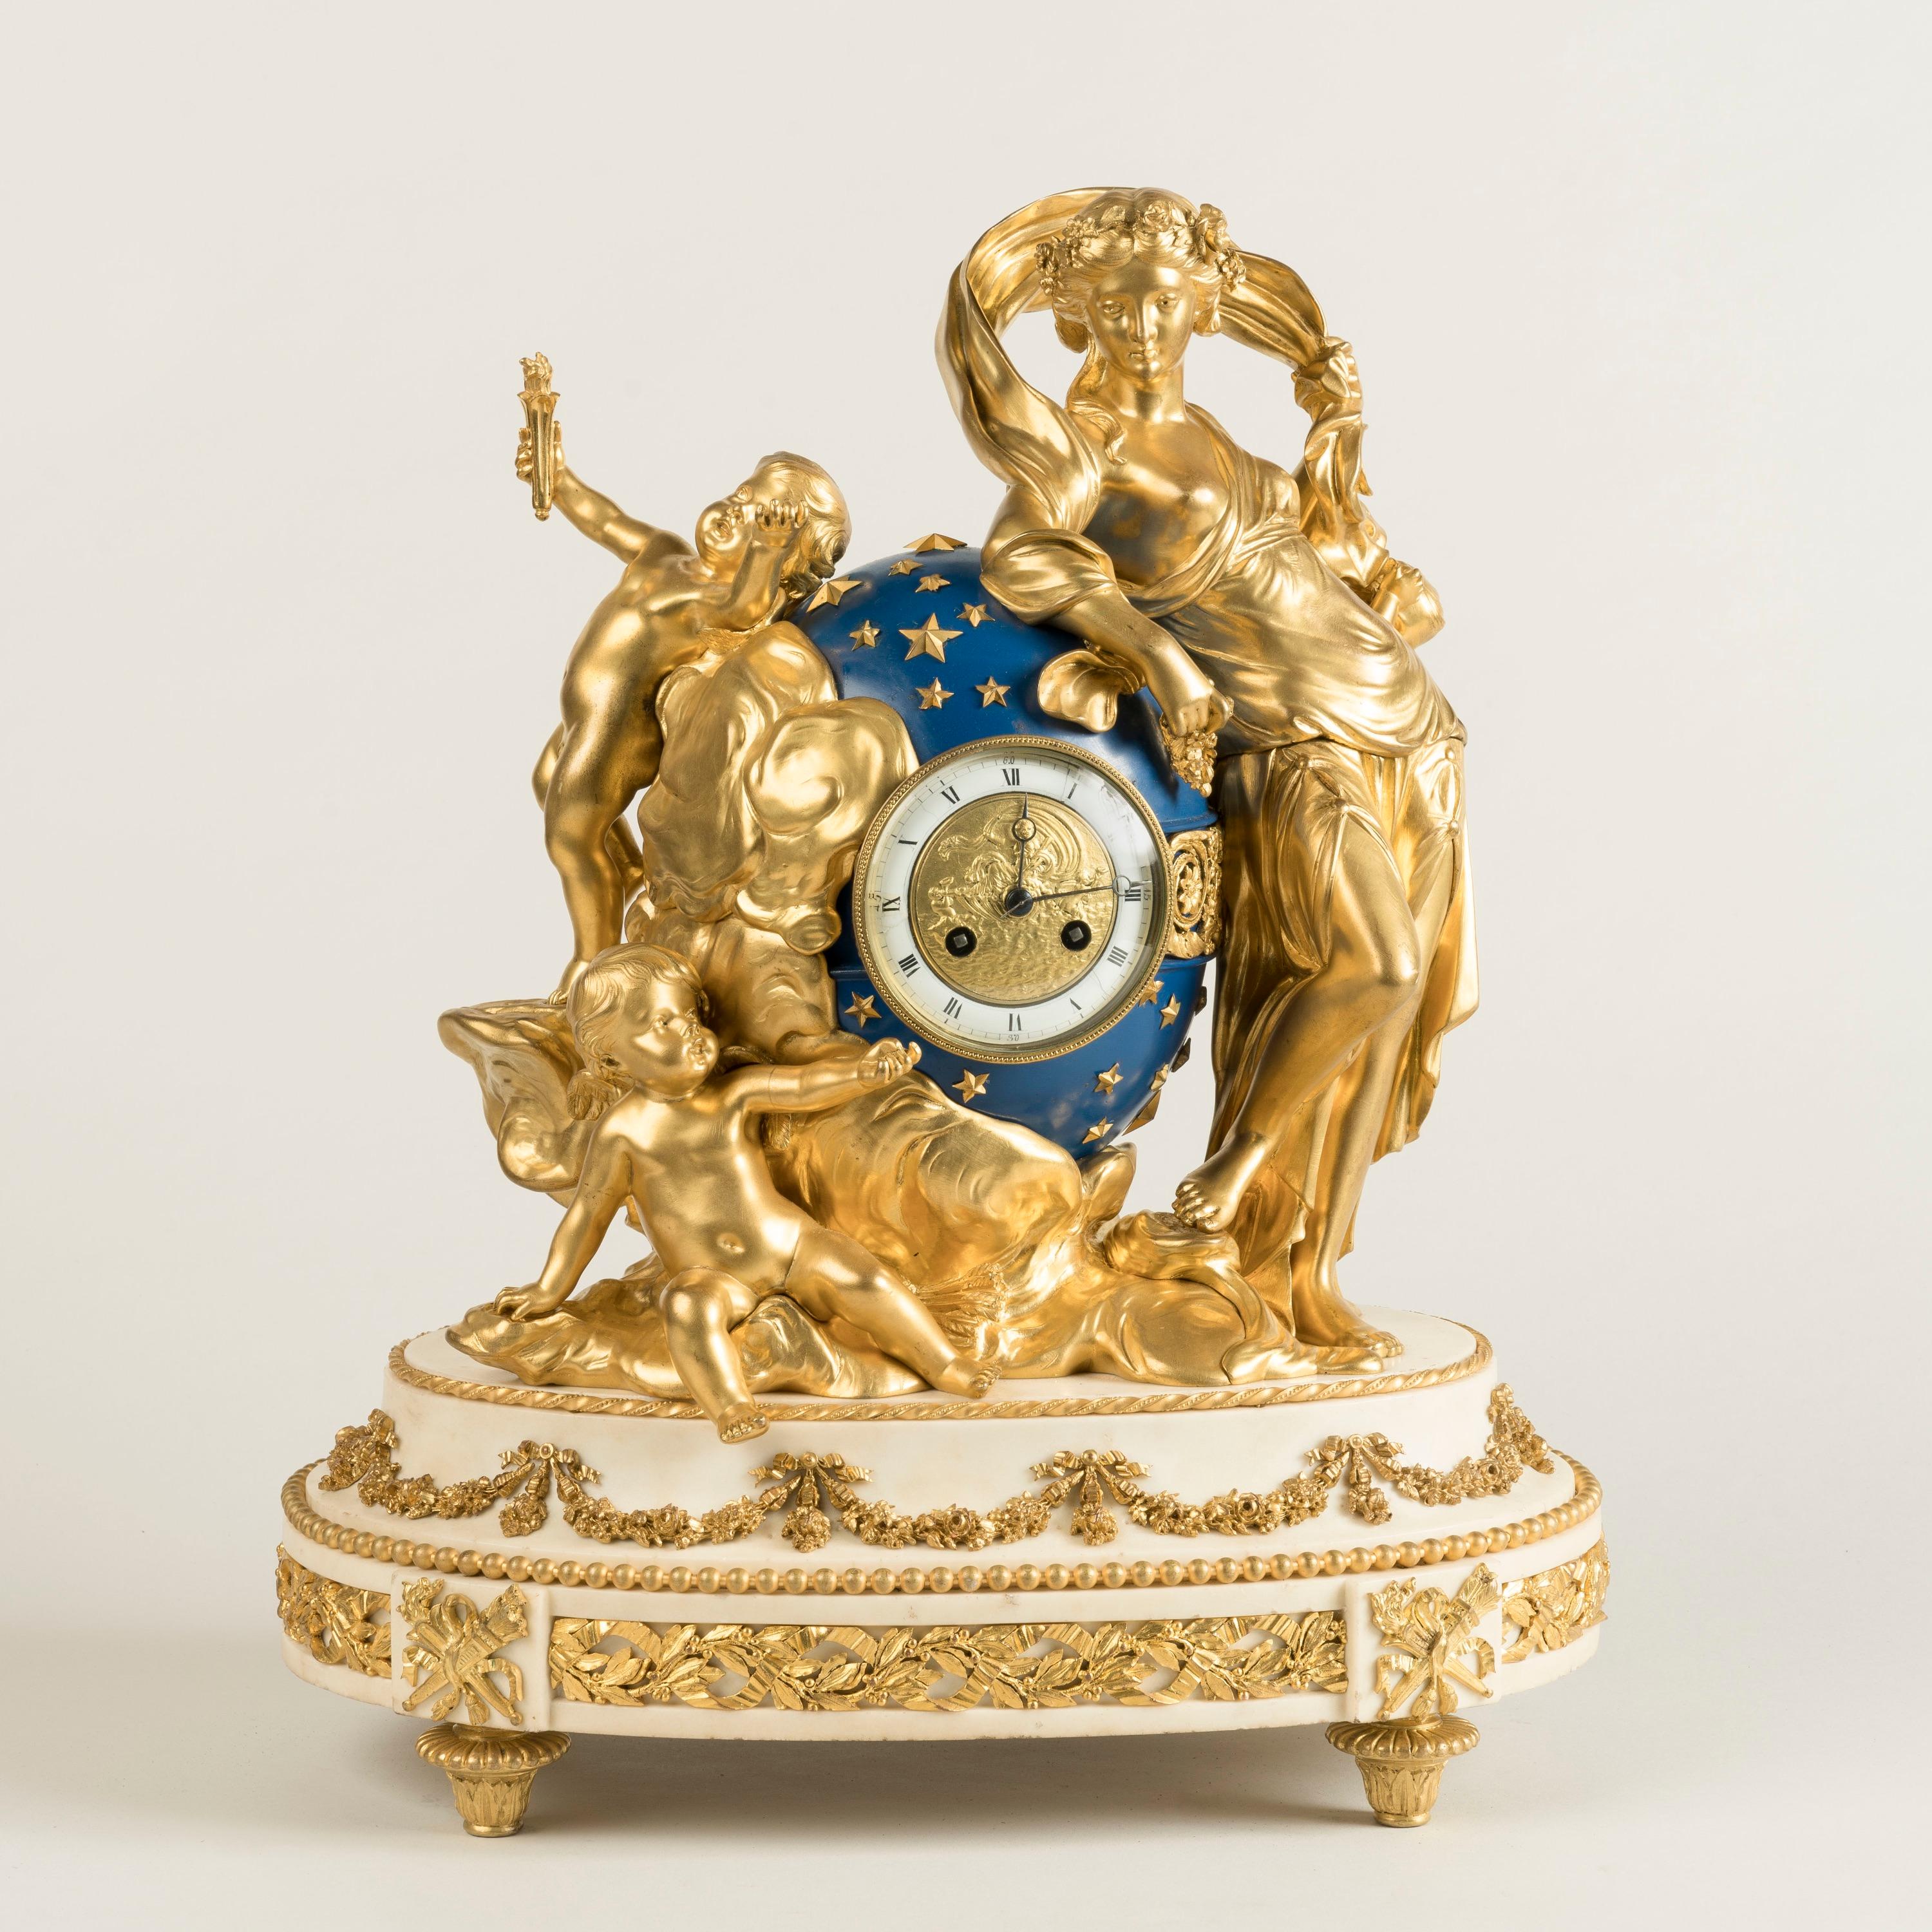 An Impressive Marble and Gilt Bronze Mantel Clock
In the Louis XVI Manner

Constructed from a marble platform with a bronze group above; all confidently dressed with exquisite hand-chased and me rcury gilded ormolu mounts, rising from three toupie